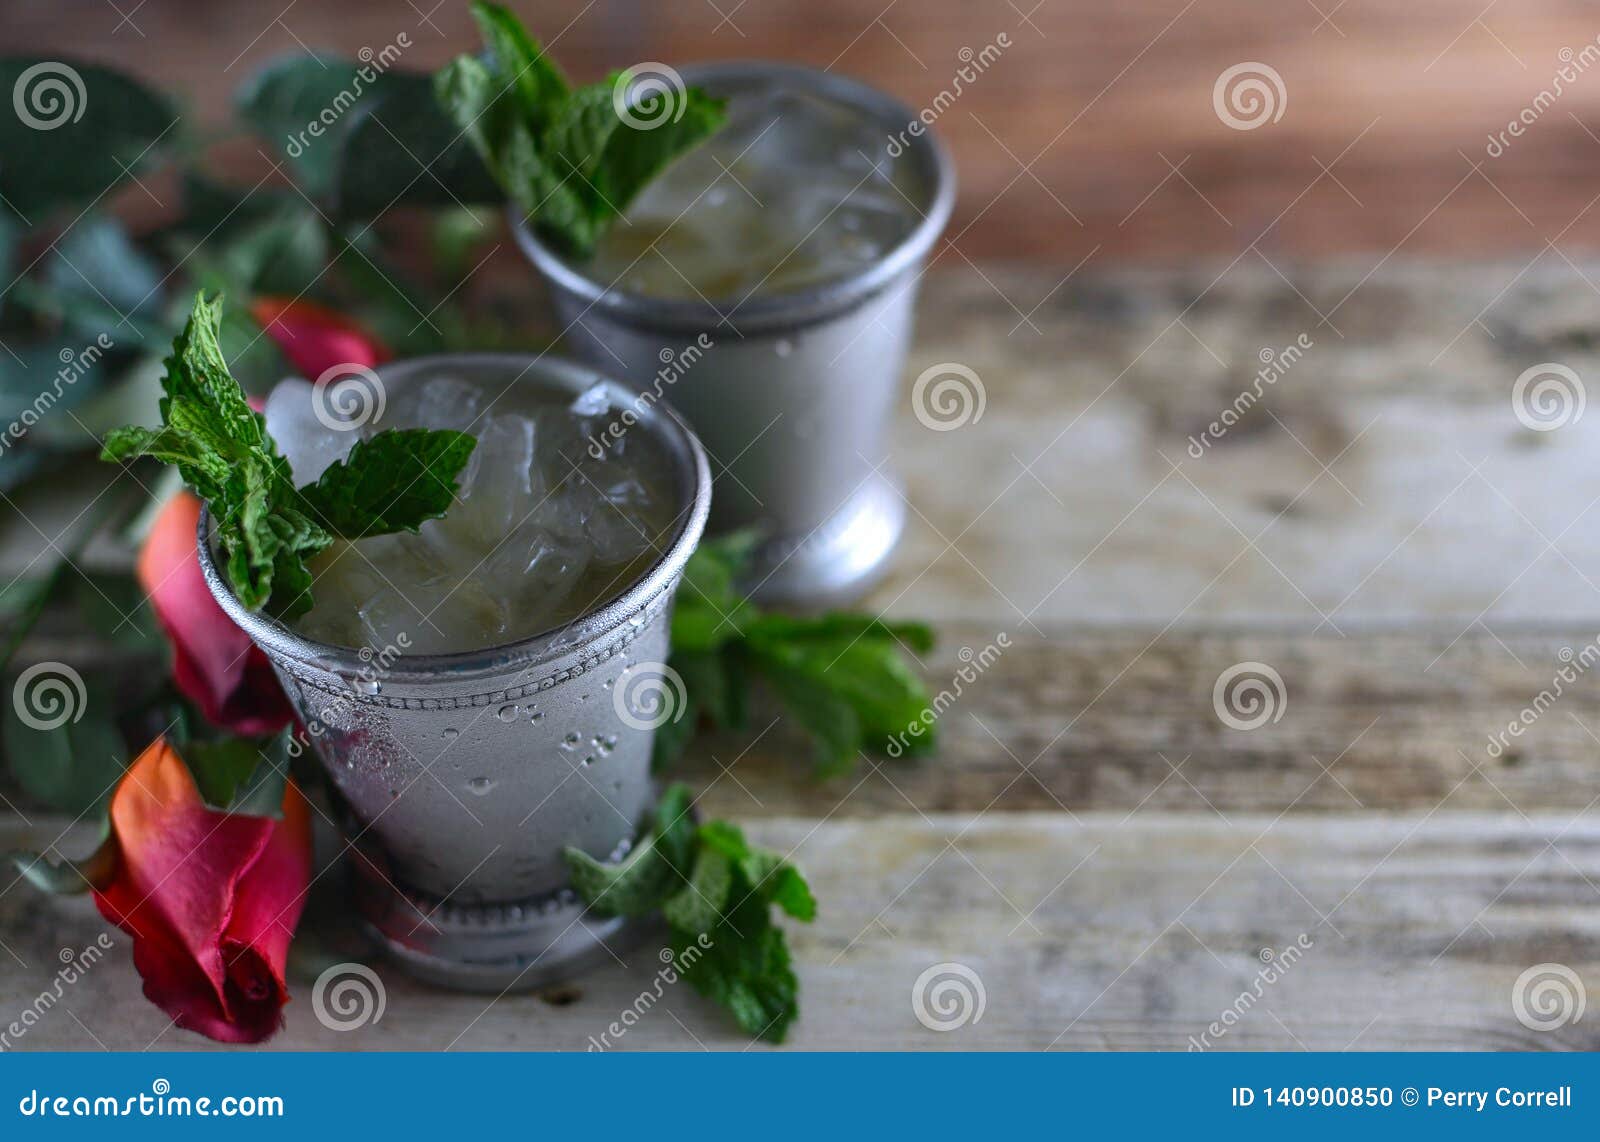 image for kentucky derby in may showing two silver mint julep cups with crushed ice and fresh mint in a rustic setting.